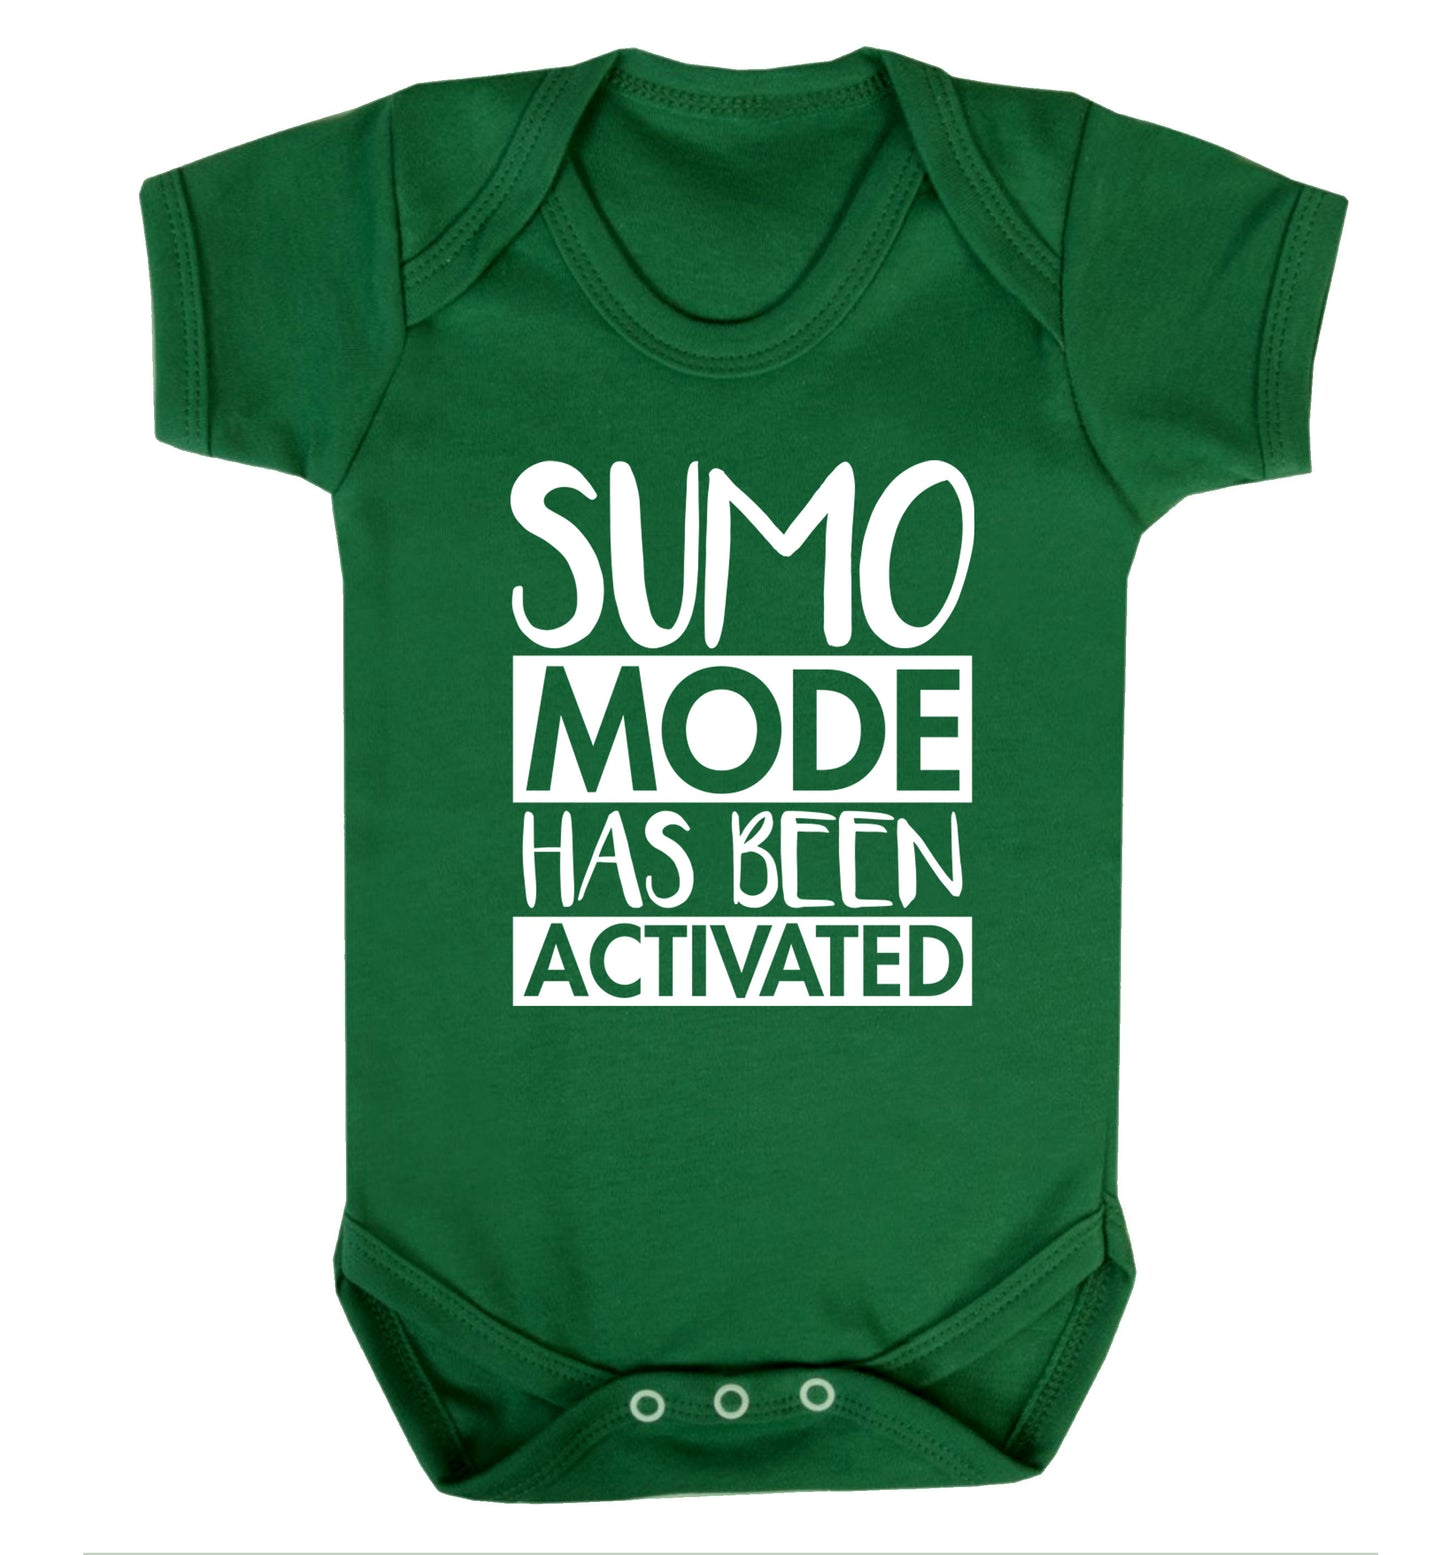 Sumo mode activated Baby Vest green 18-24 months